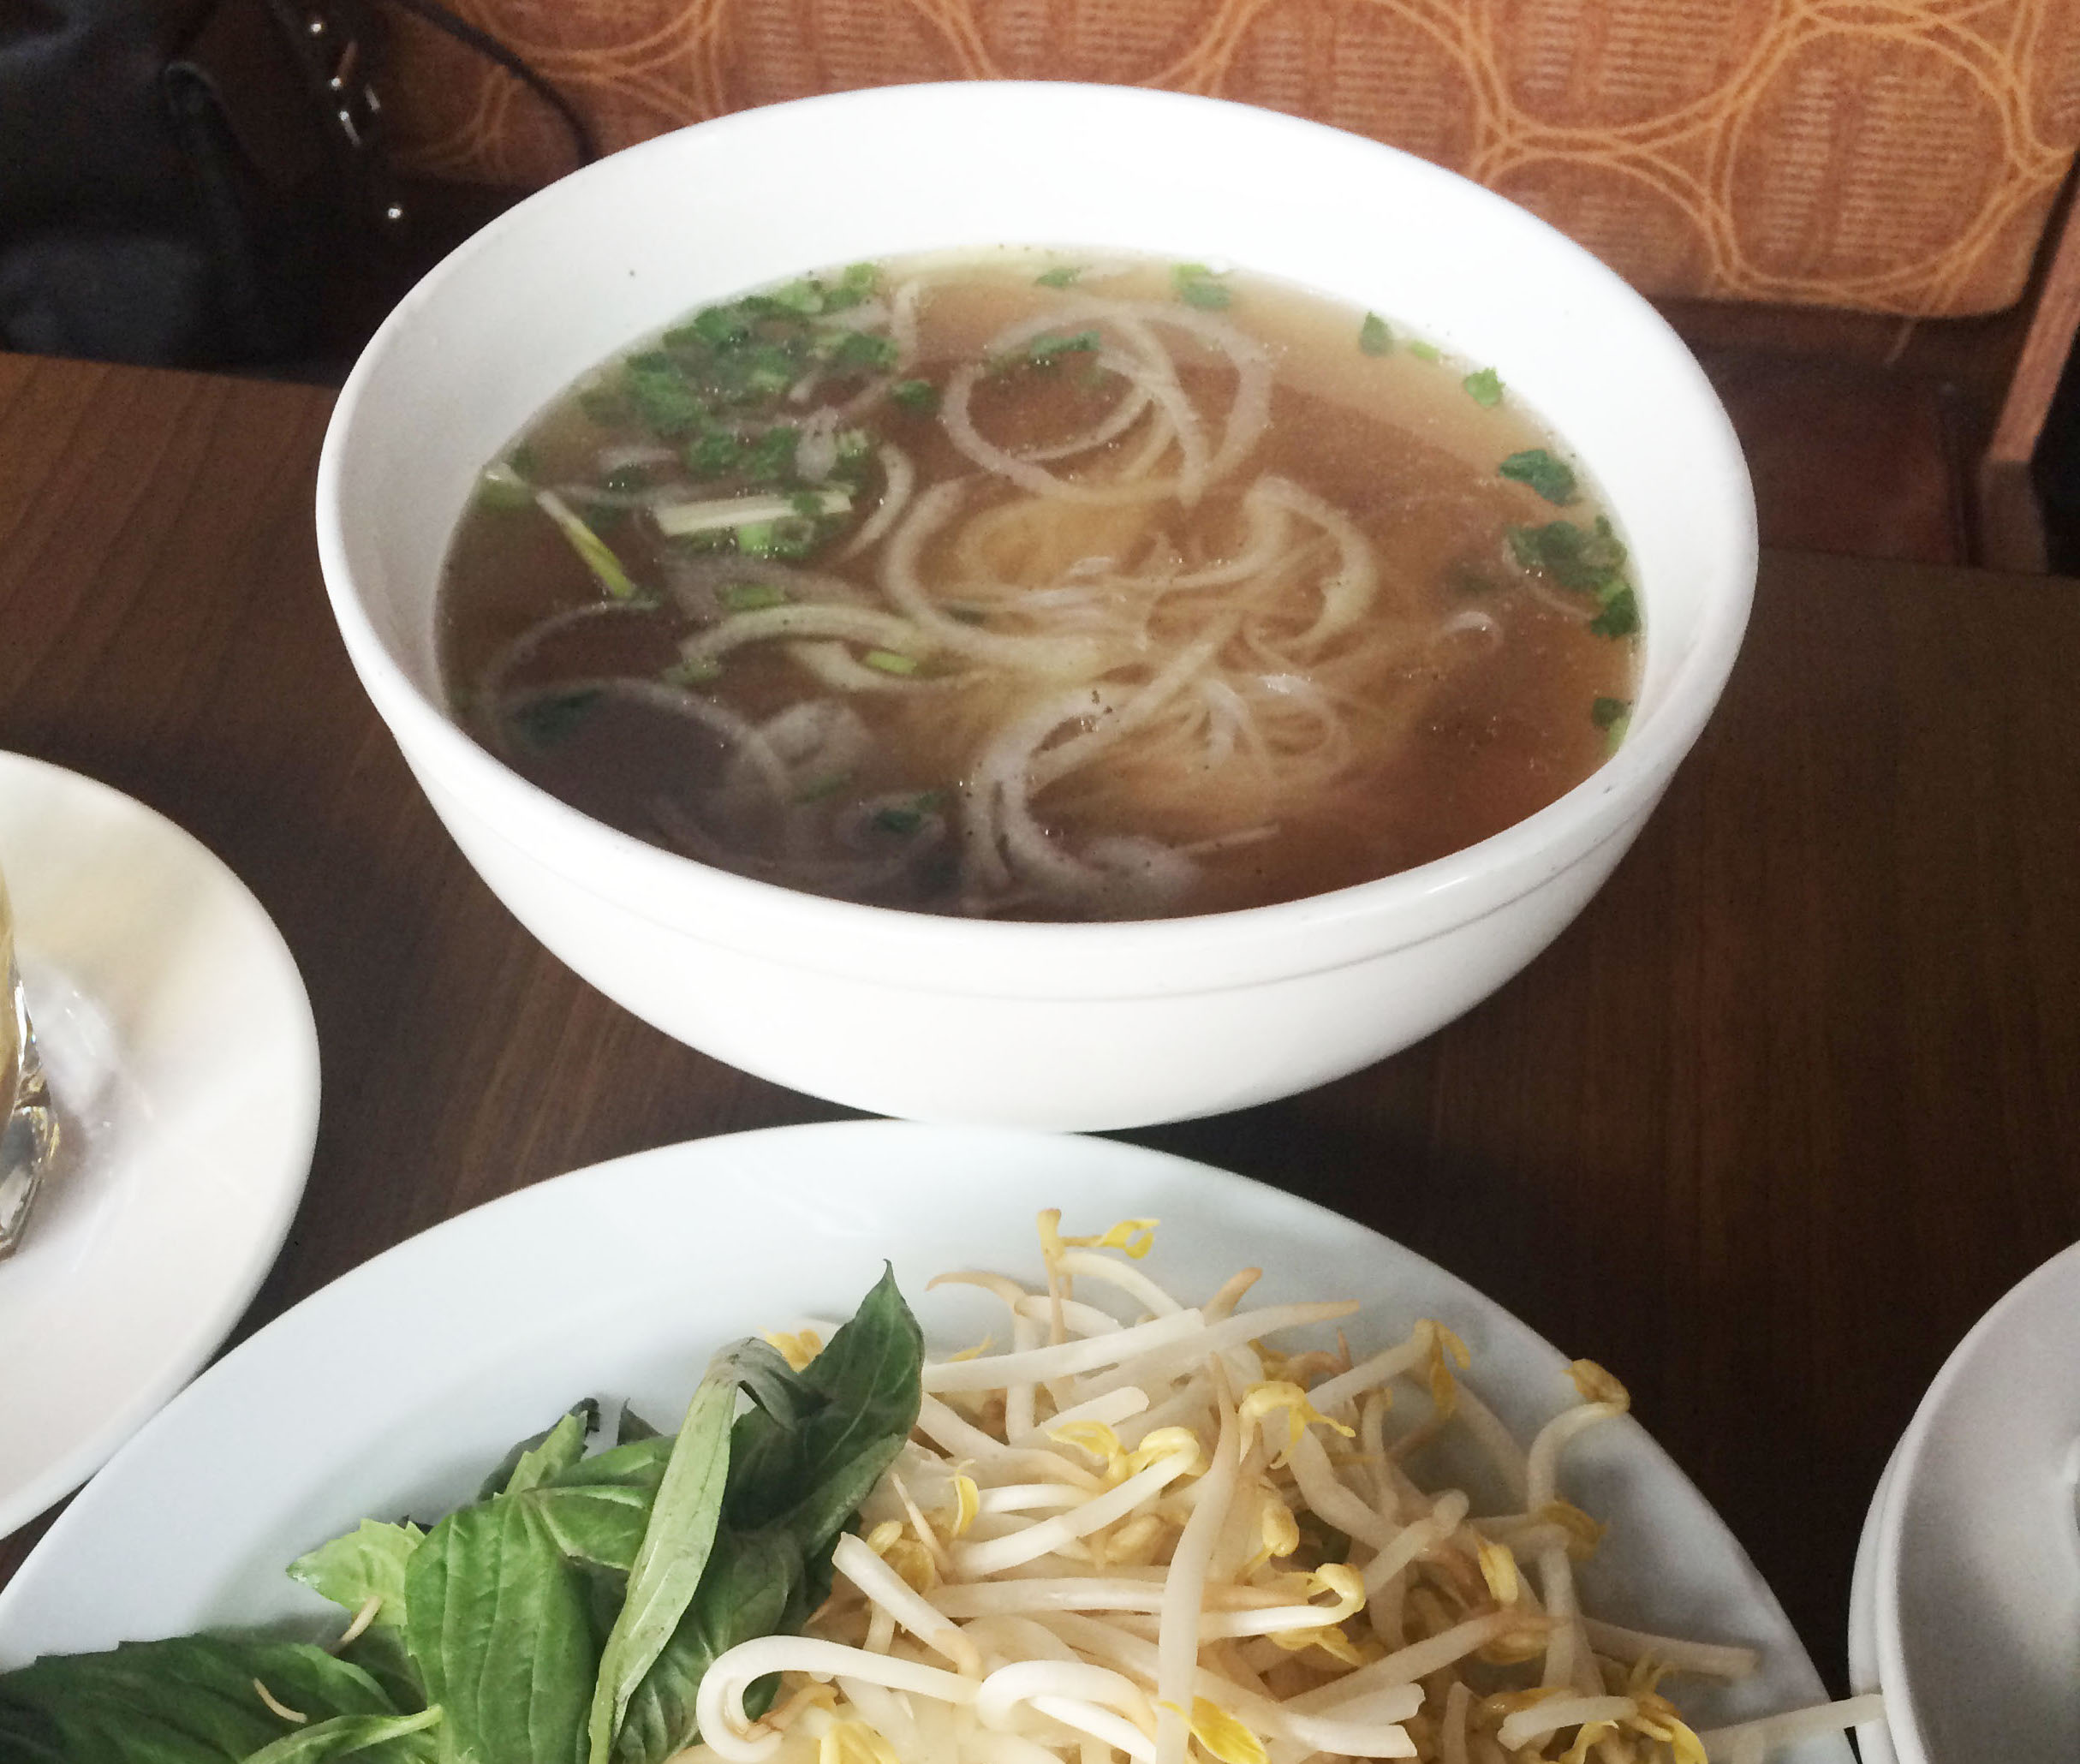 A large bowl of pho, a broth based Vietnamese soup, sit on a table filled with noodles. A plate next to this bowl holds bean sprouts and Thai basil.